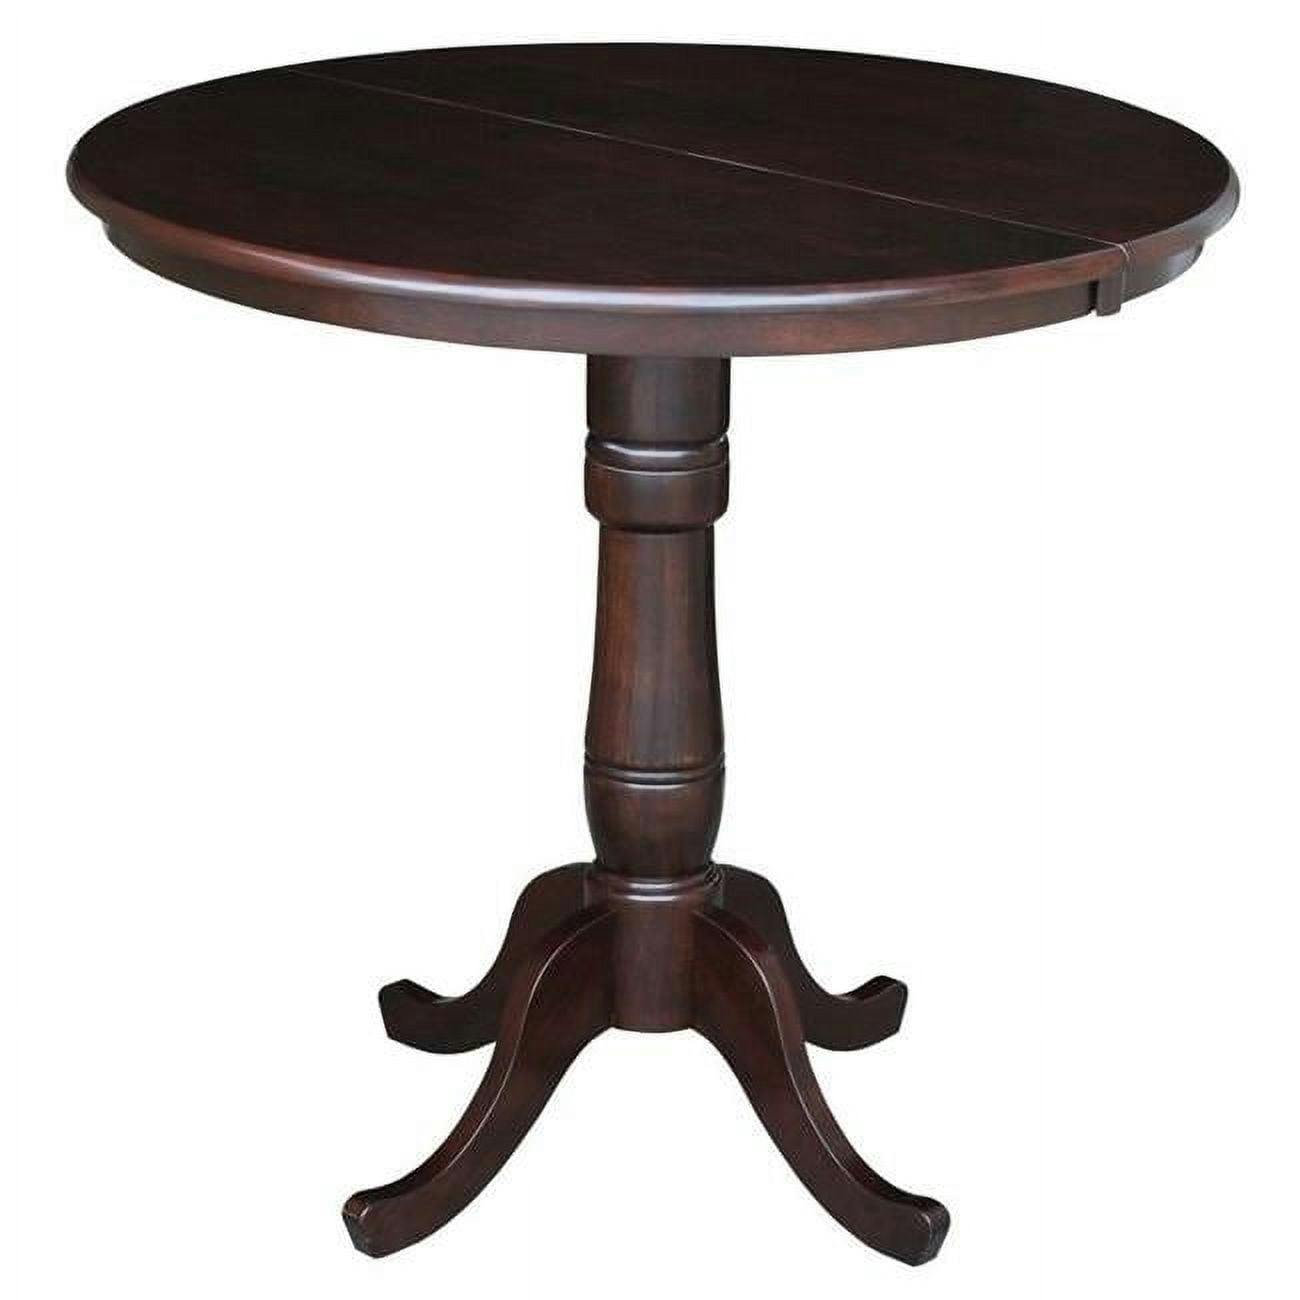 Rich Mocha Solid Wood 36" Round Extendable Counter Height Table